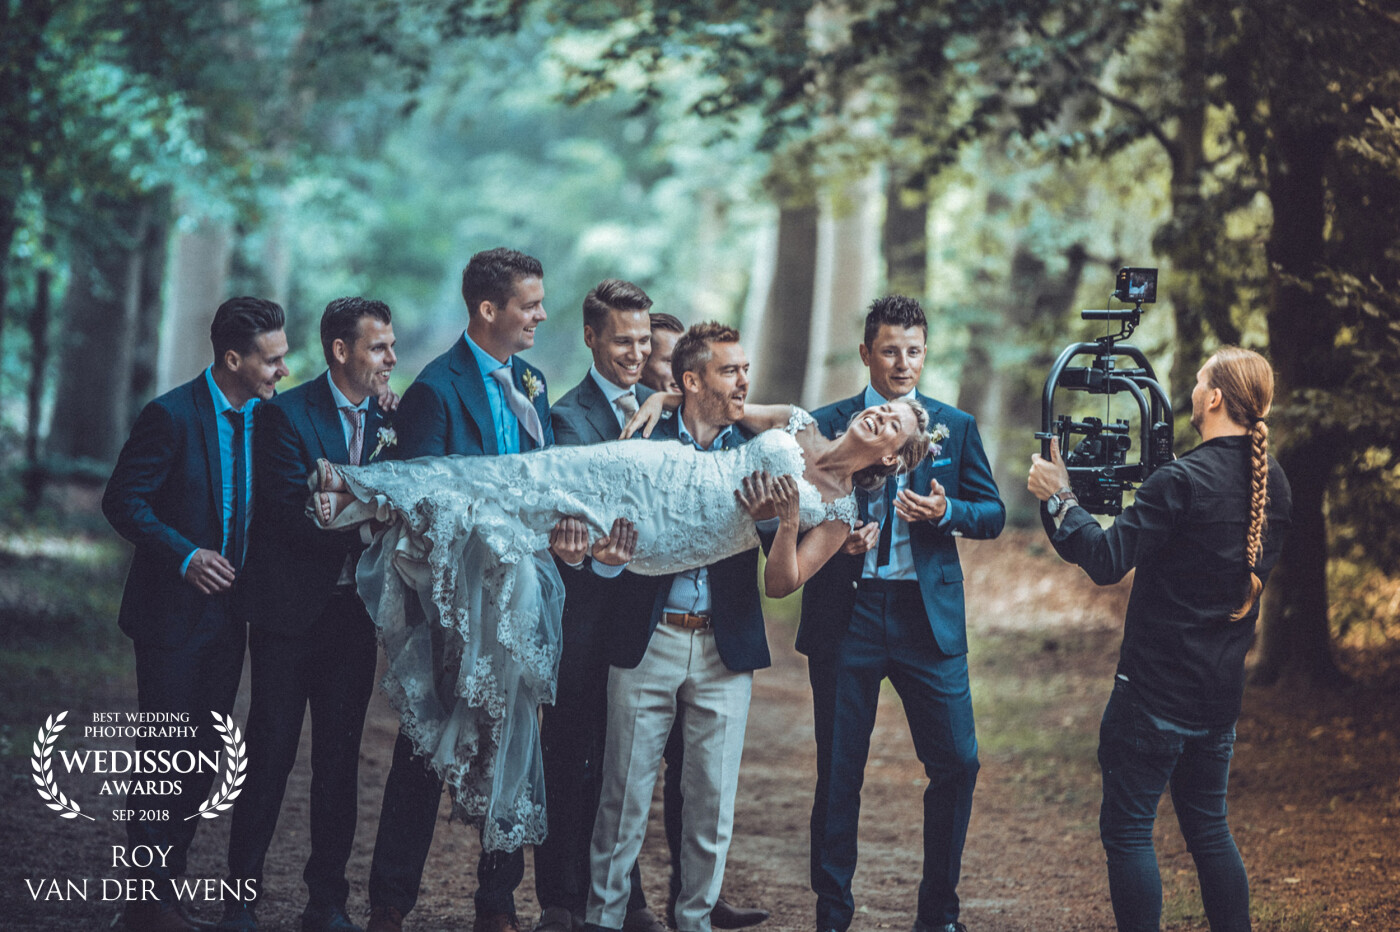 When you tell the groomsmen they can do what they want, this is the result. Meanwhile, the bride was filmed by a colleague who filmed everything.